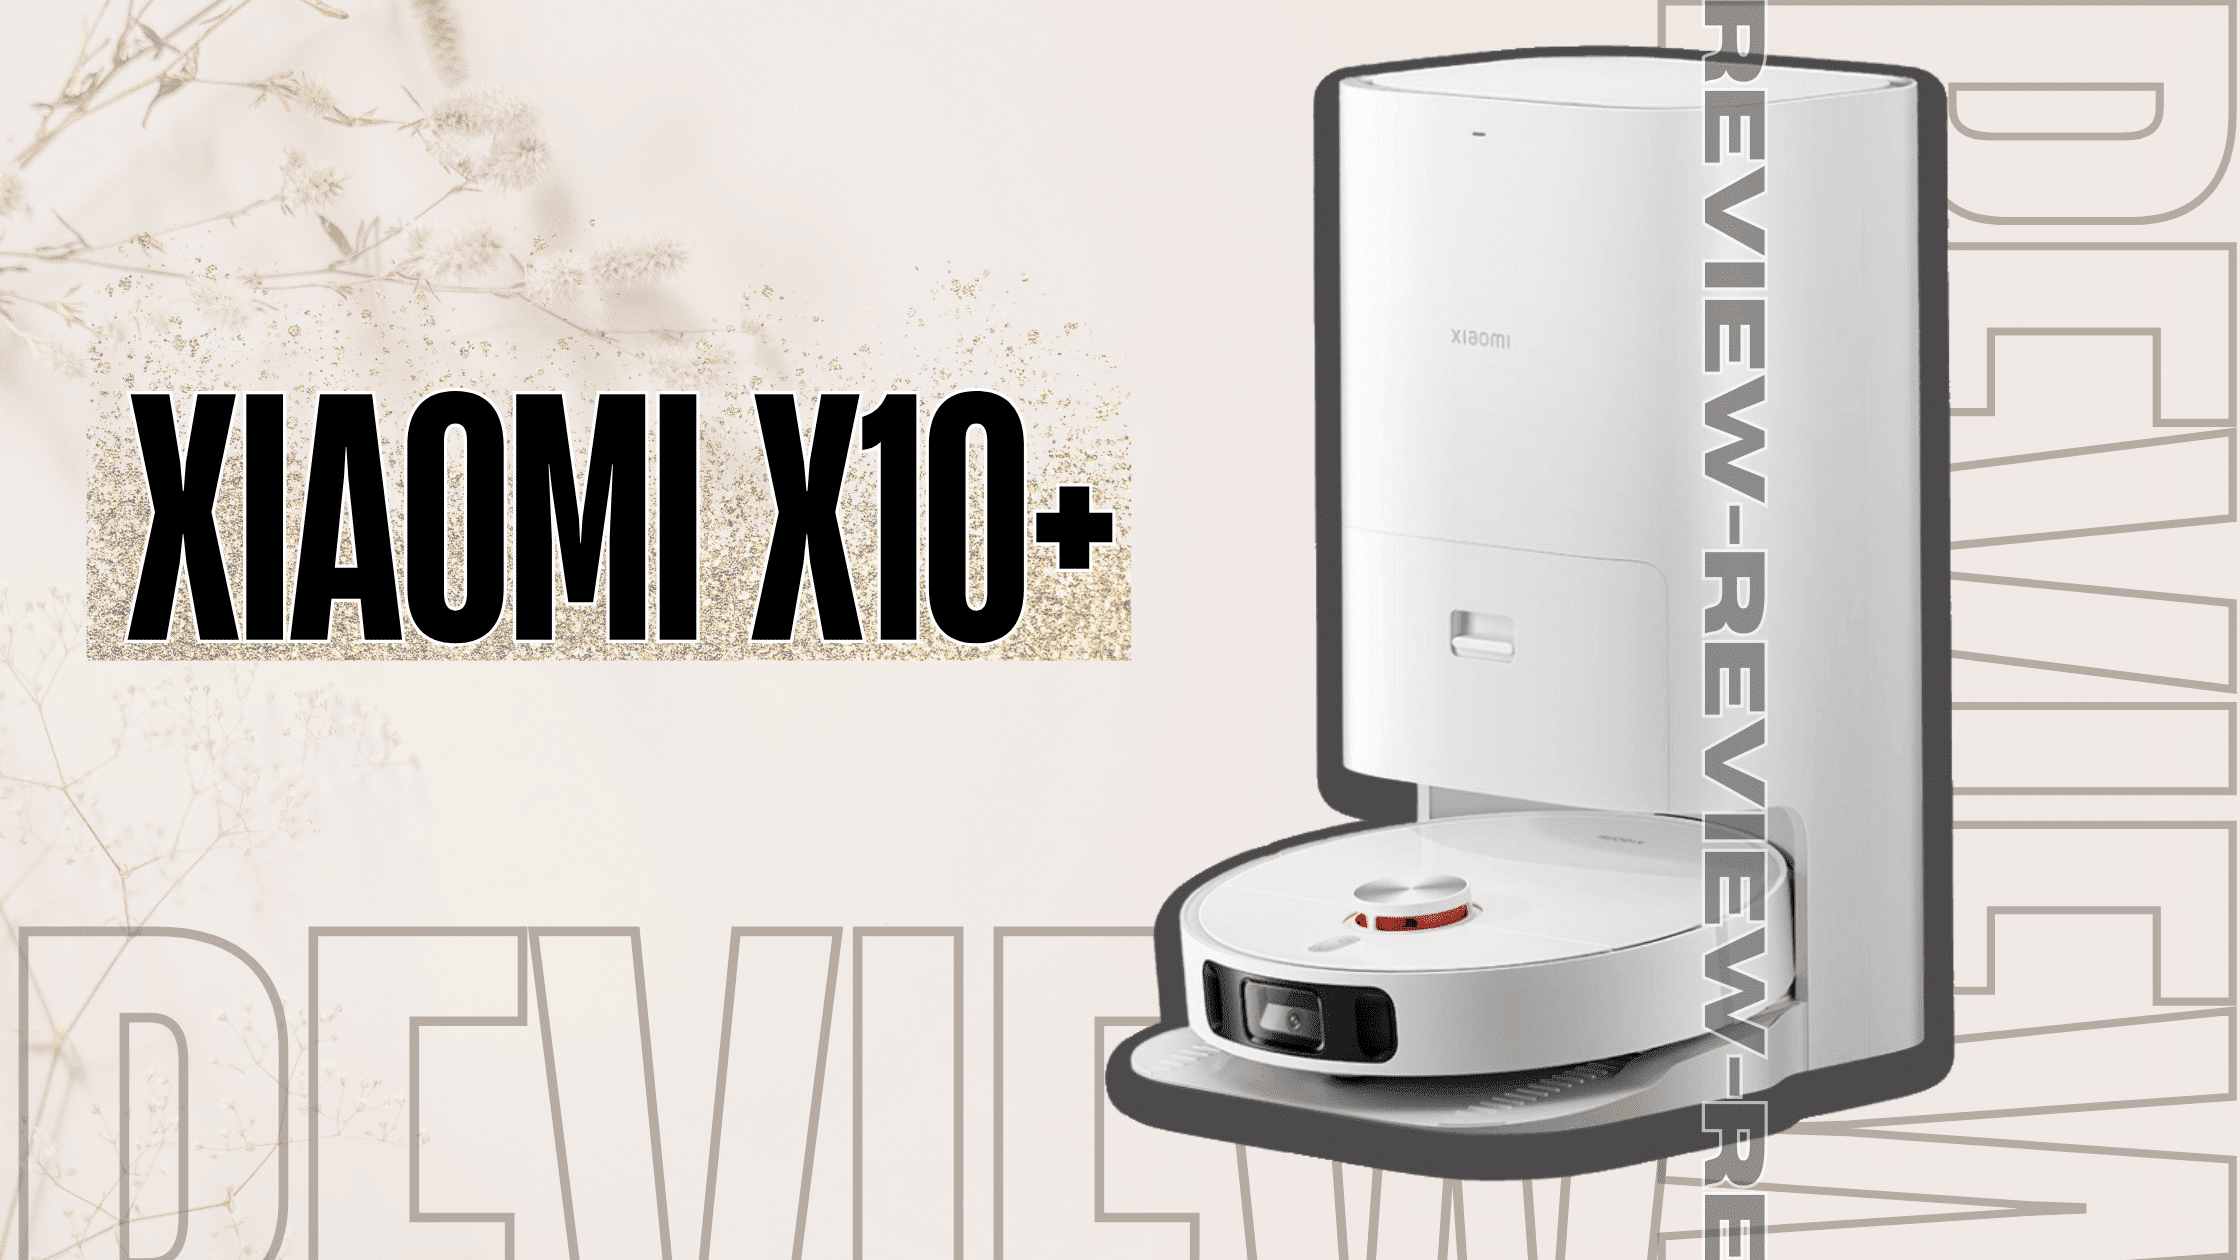 Xiaomi Robot Vacuum X10+ review: Excellent automated cleaning!